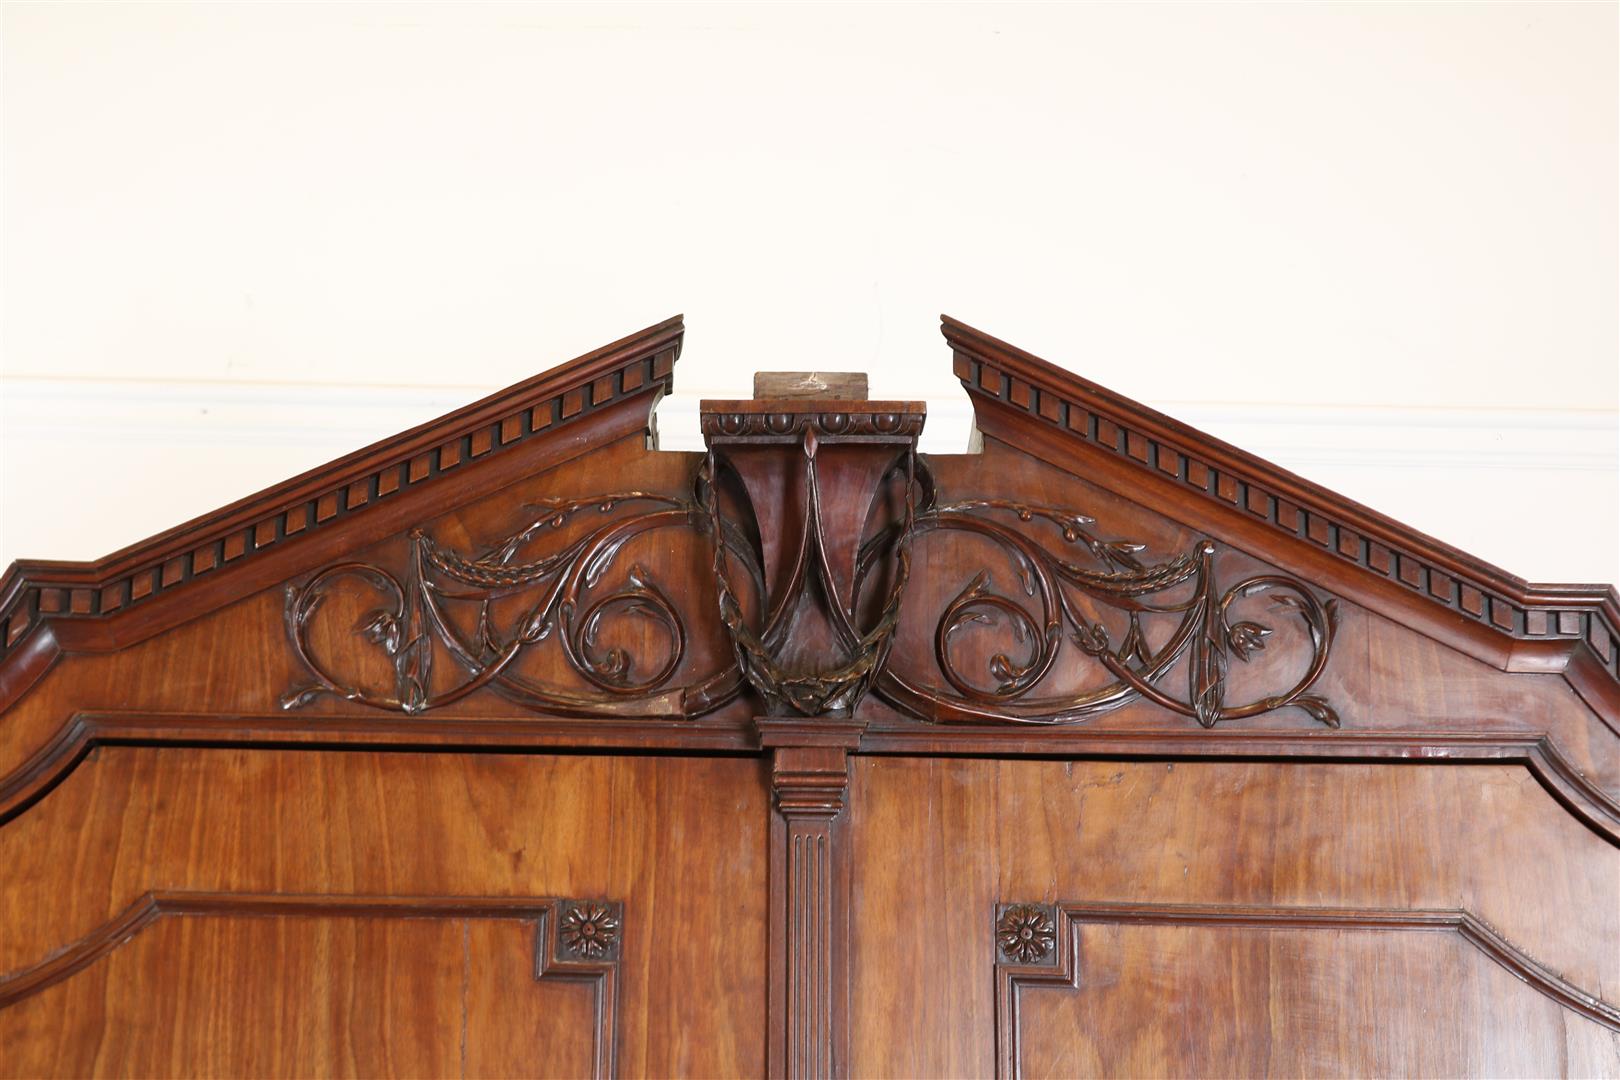 Mahogany Louis XVI breakfront cabinet with carved garlands in crest, 2 panel doors and 3 drawers, - Image 3 of 7